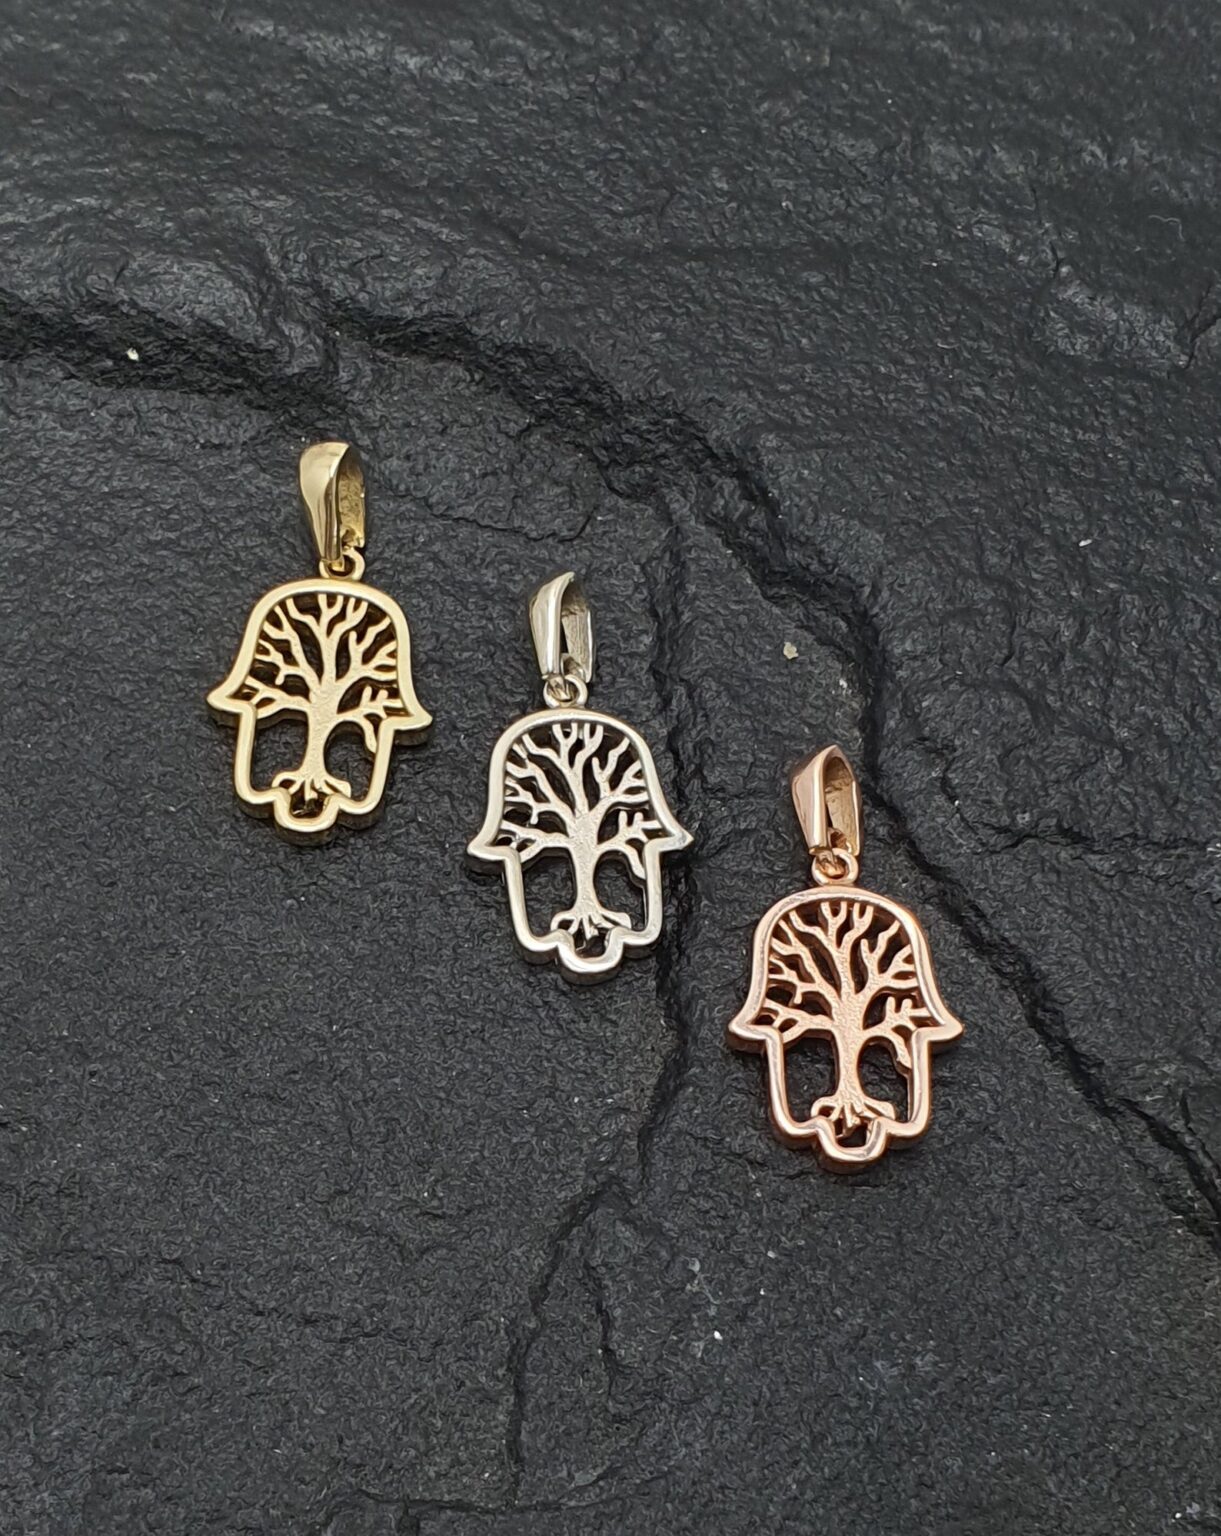 99 Hamsa Jewellery Pieces That Will Protect You From The Evil Eye ...